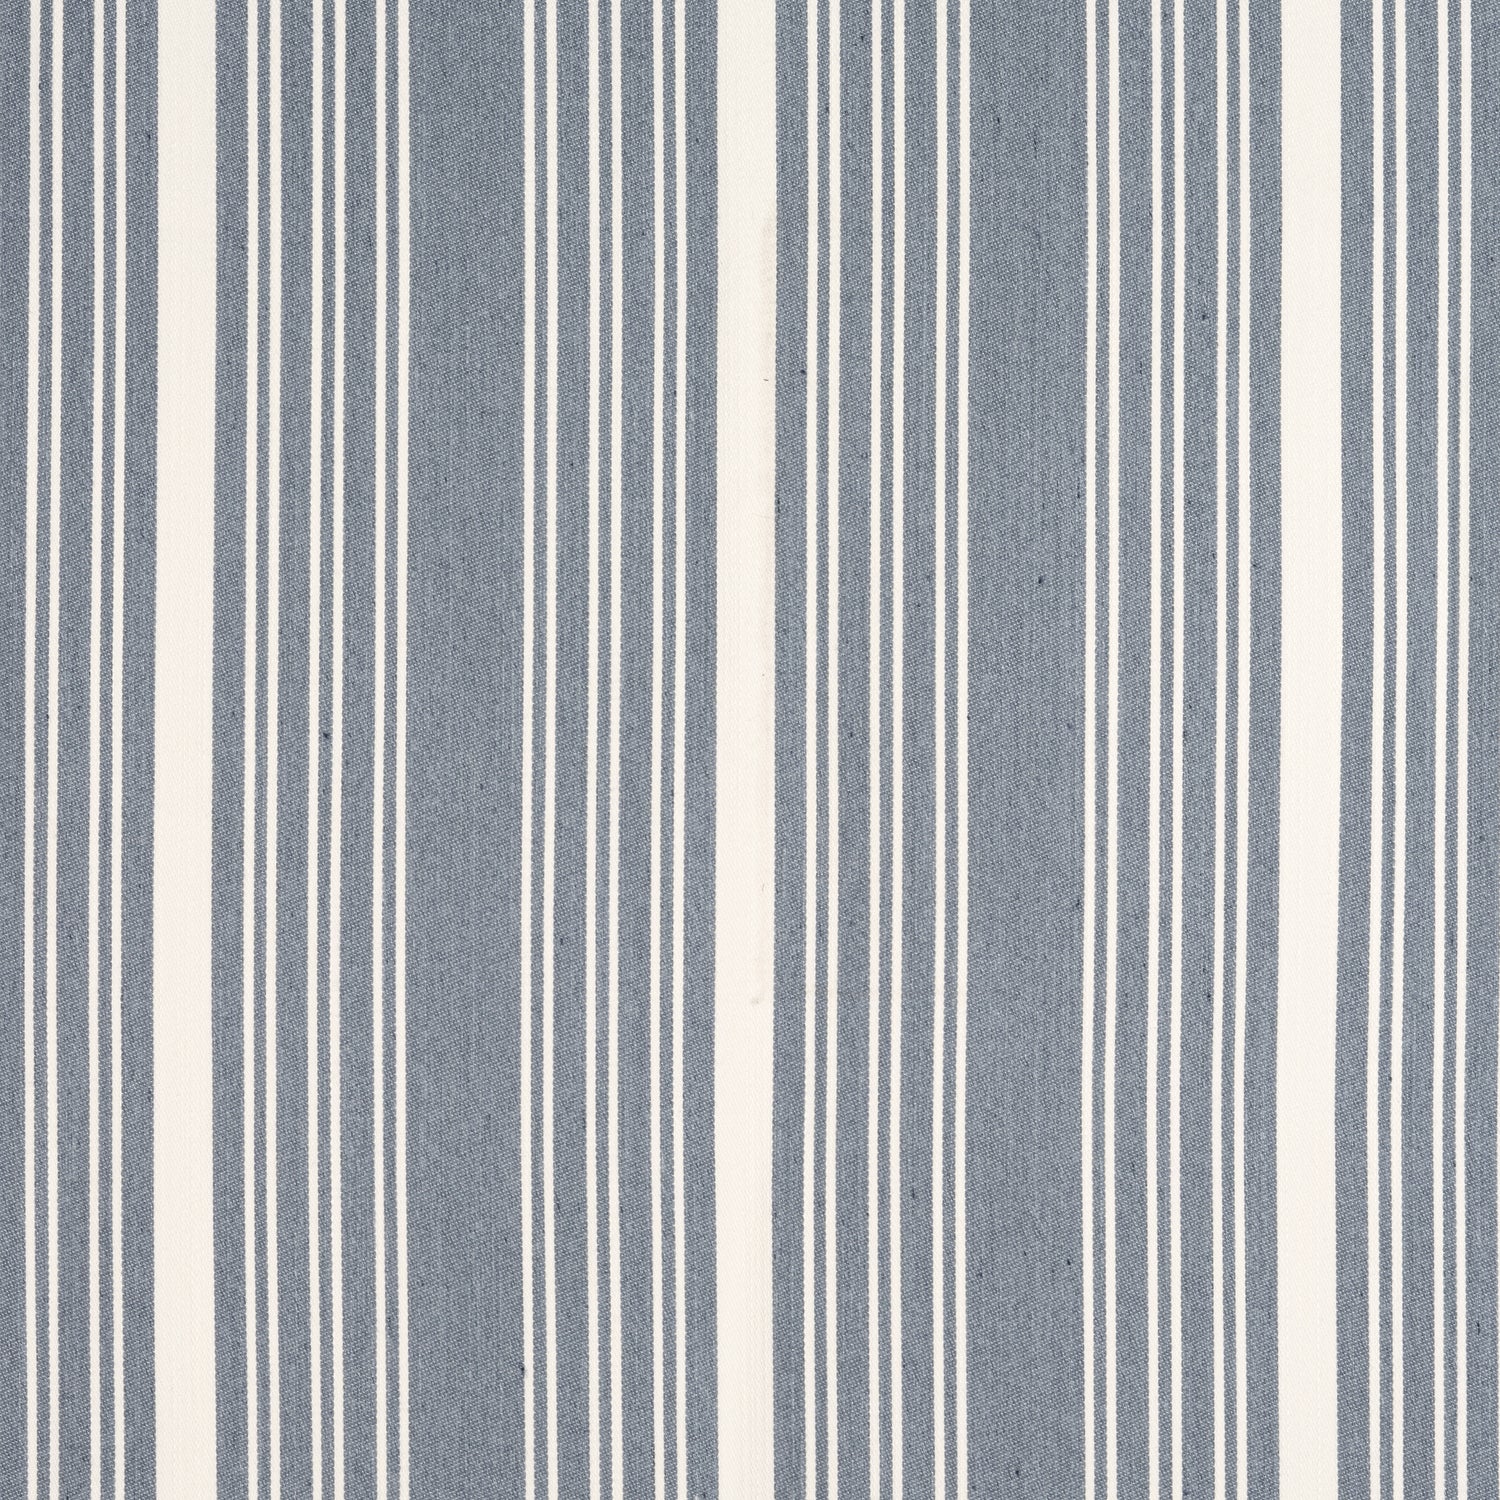 Kaia Stripe fabric in horizon color - pattern number W8540 - by Thibaut in the Villa collection